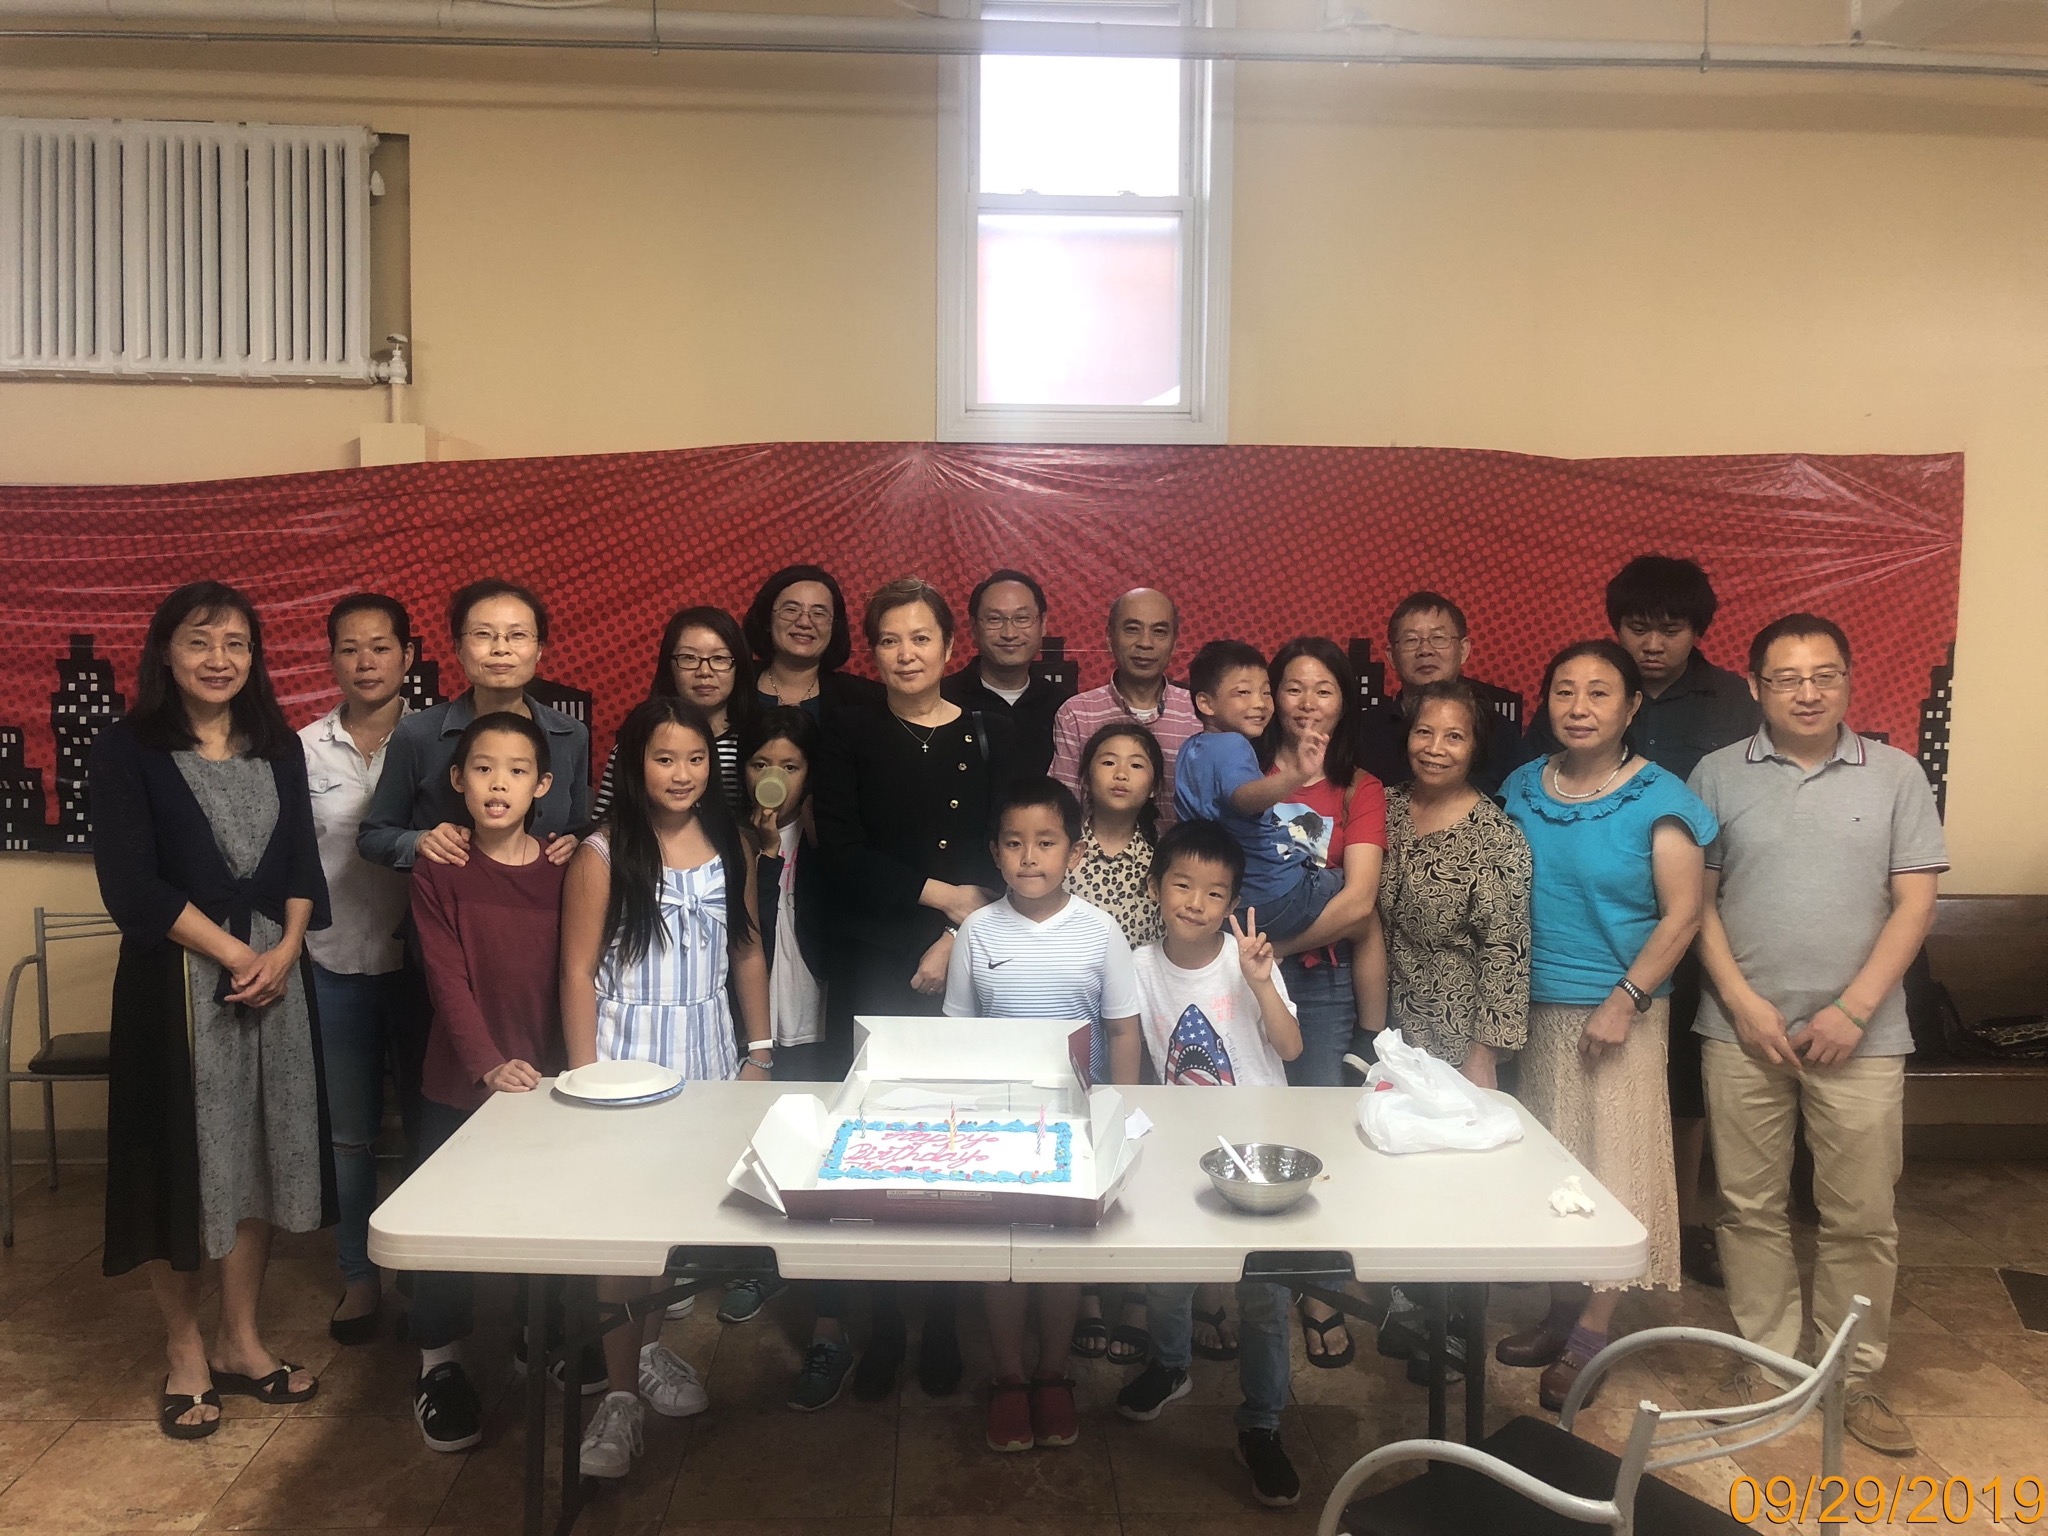 A Chinese church in the Bronx celebrates a birthday with cake.